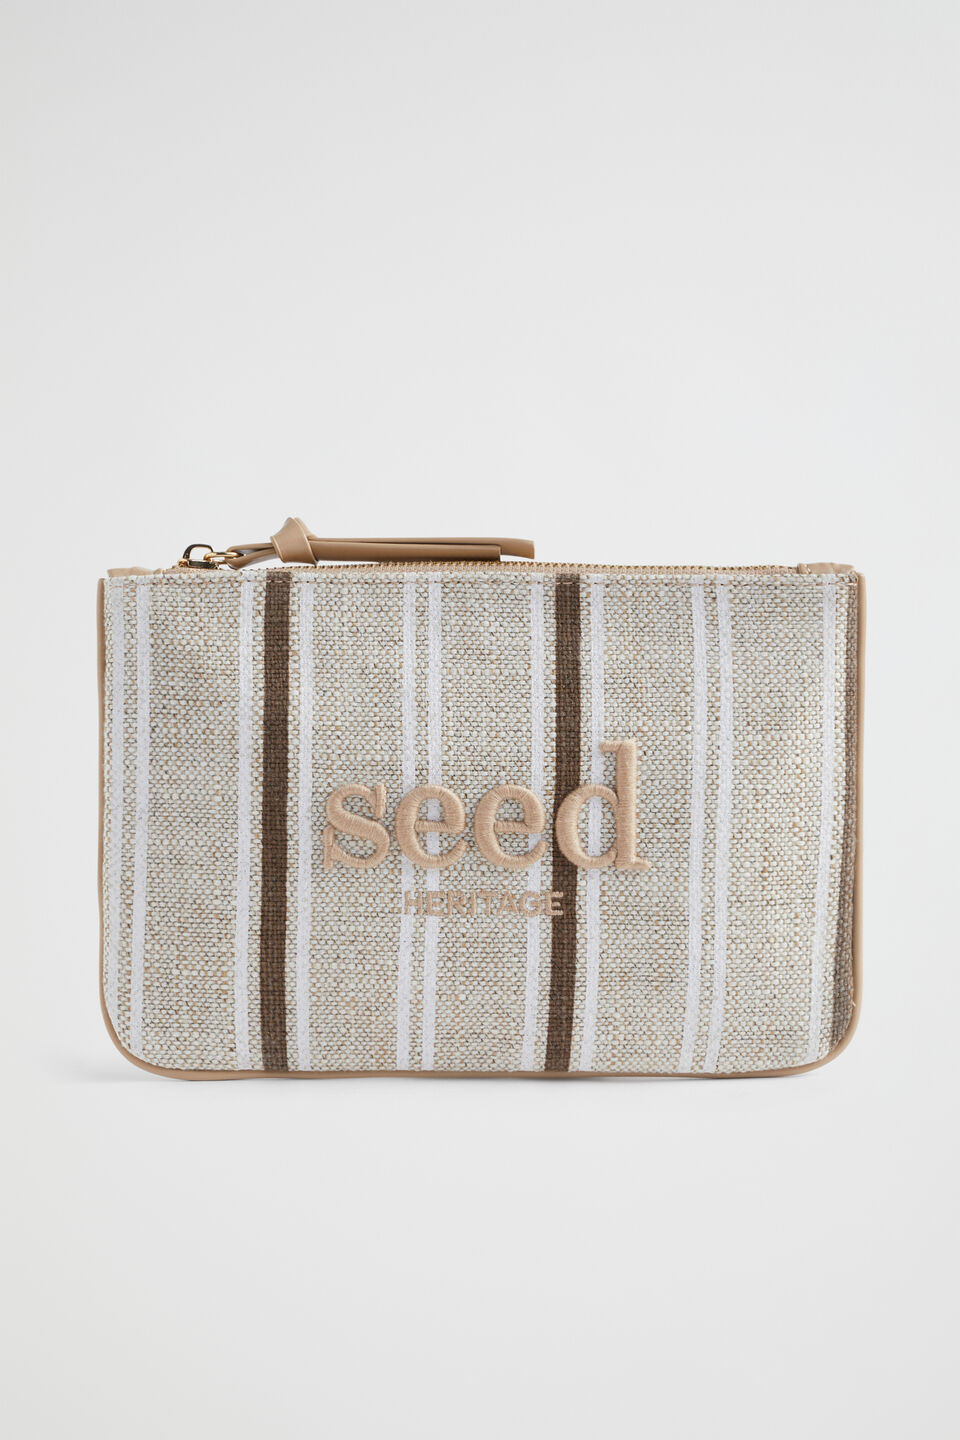 Seed Pouch  Pecan Brown Stripe